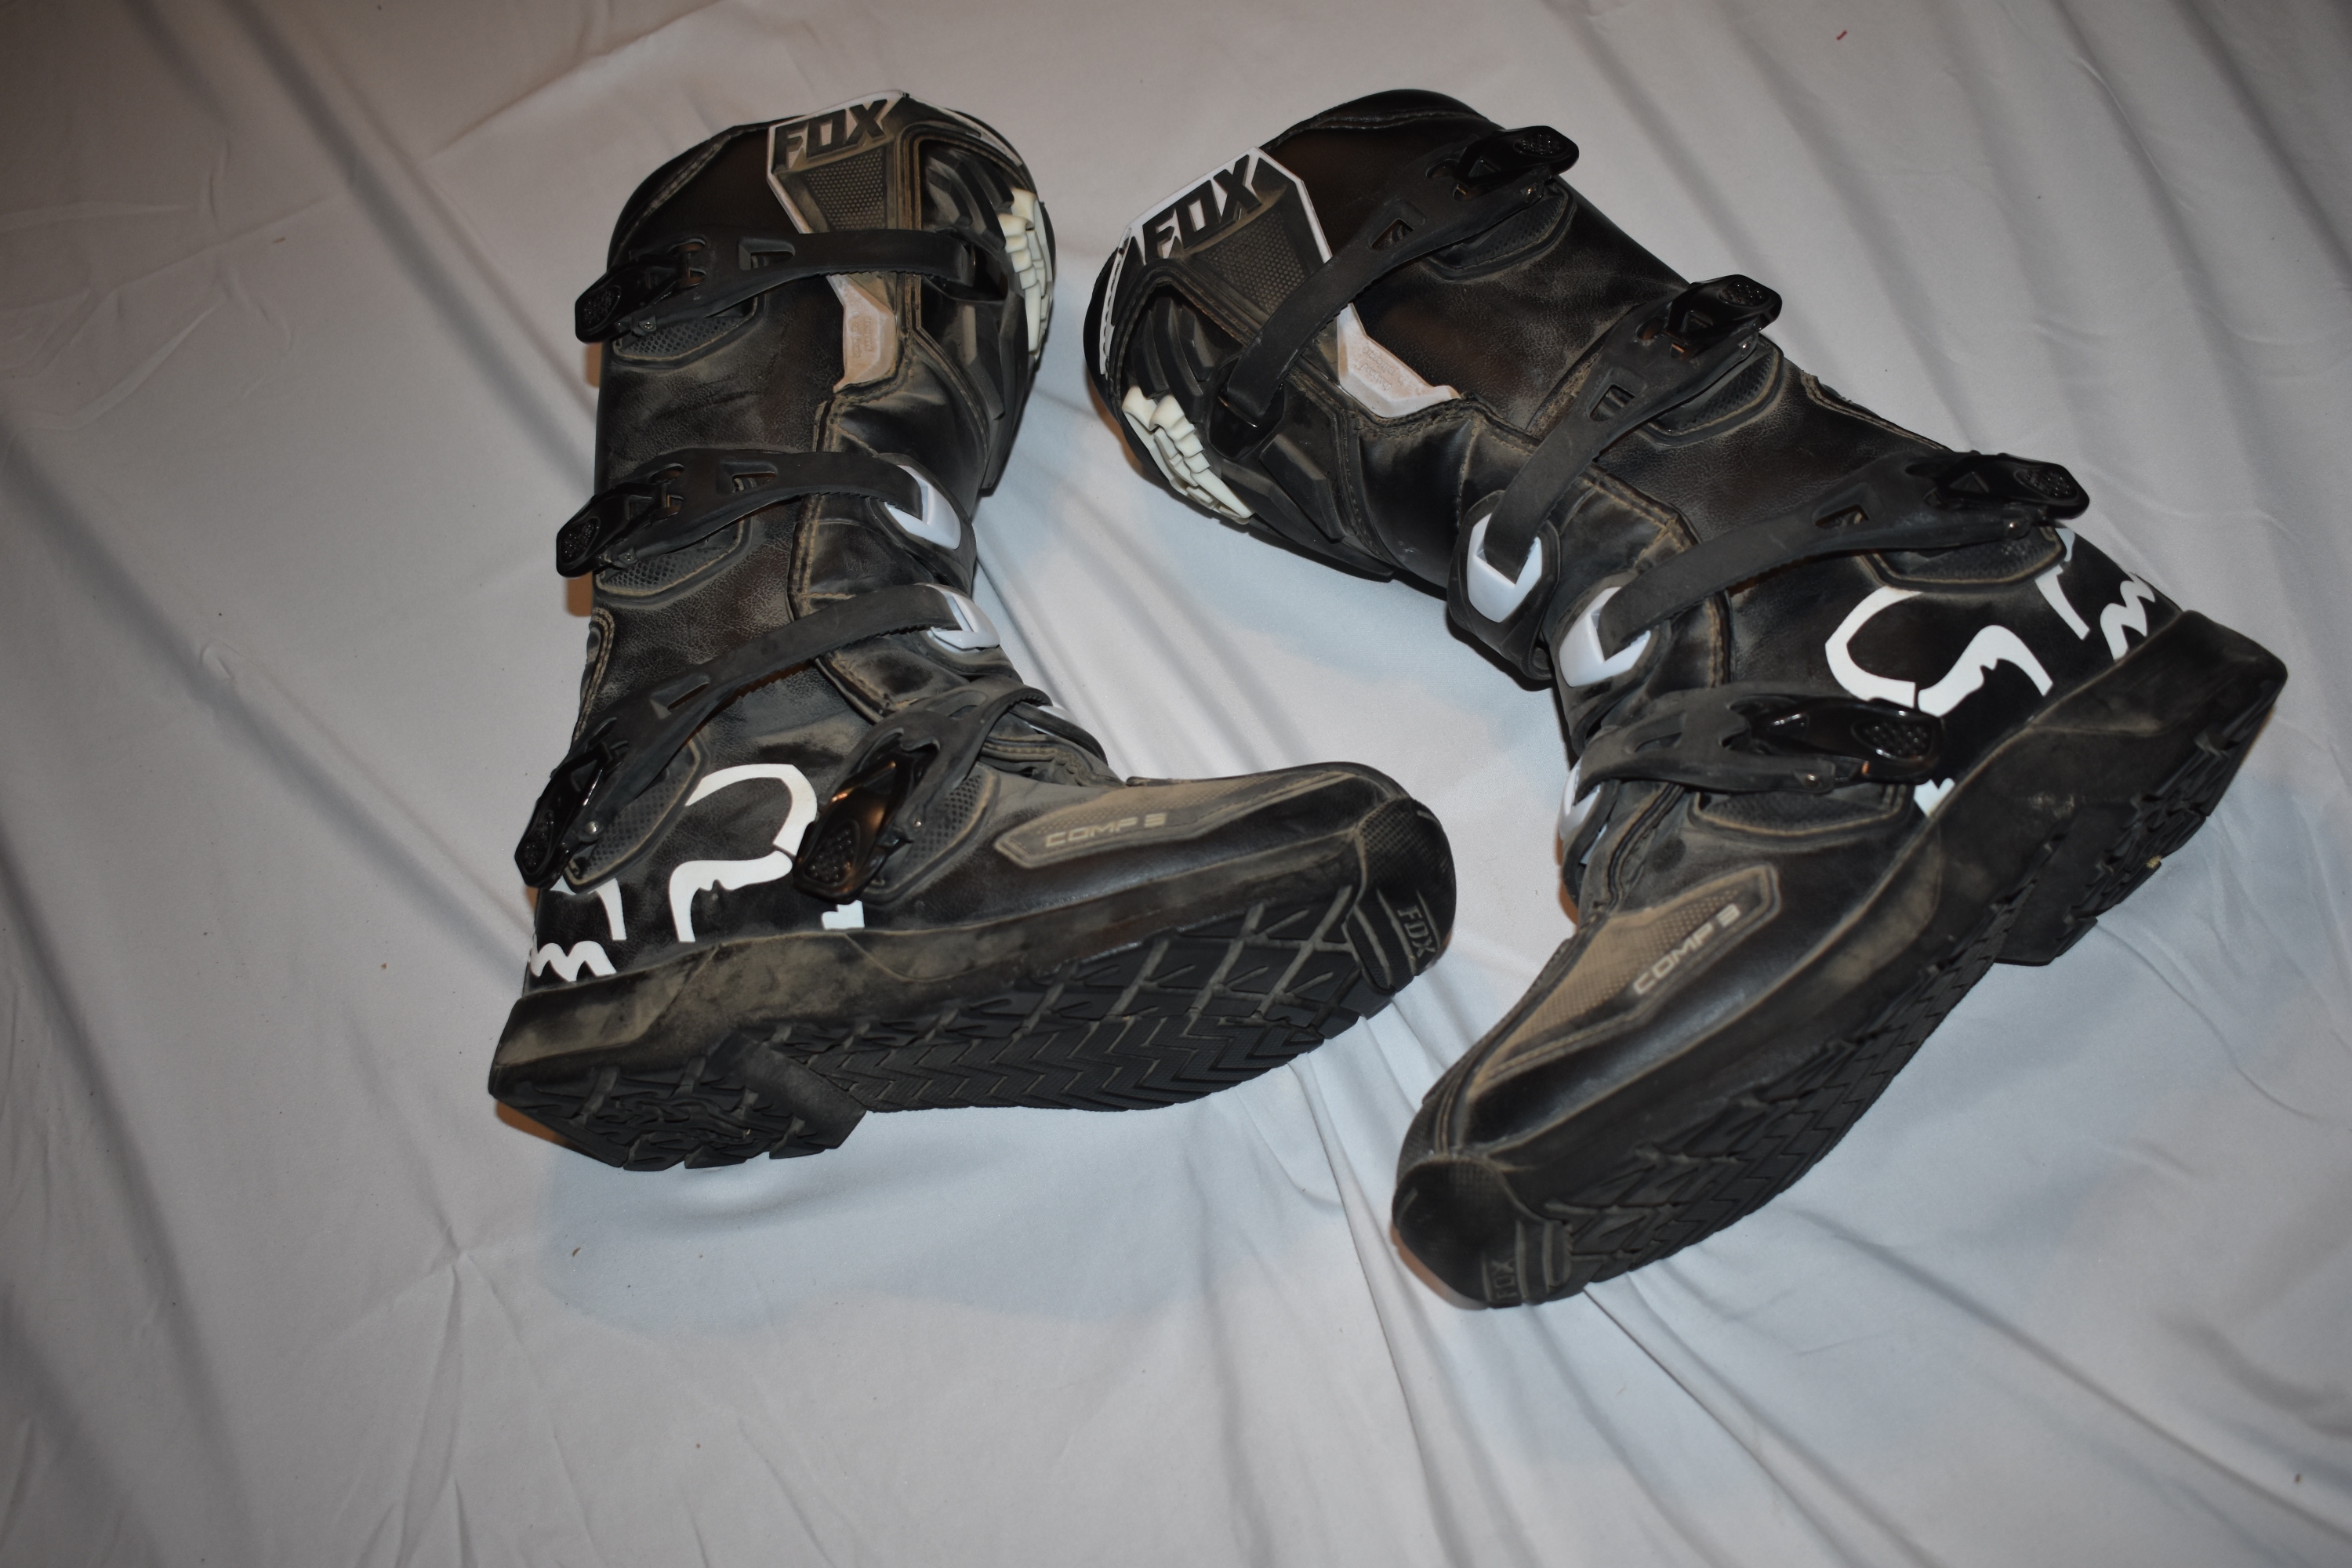 Fox Comp 5 Youth Motocross Boots, Youth Size 5